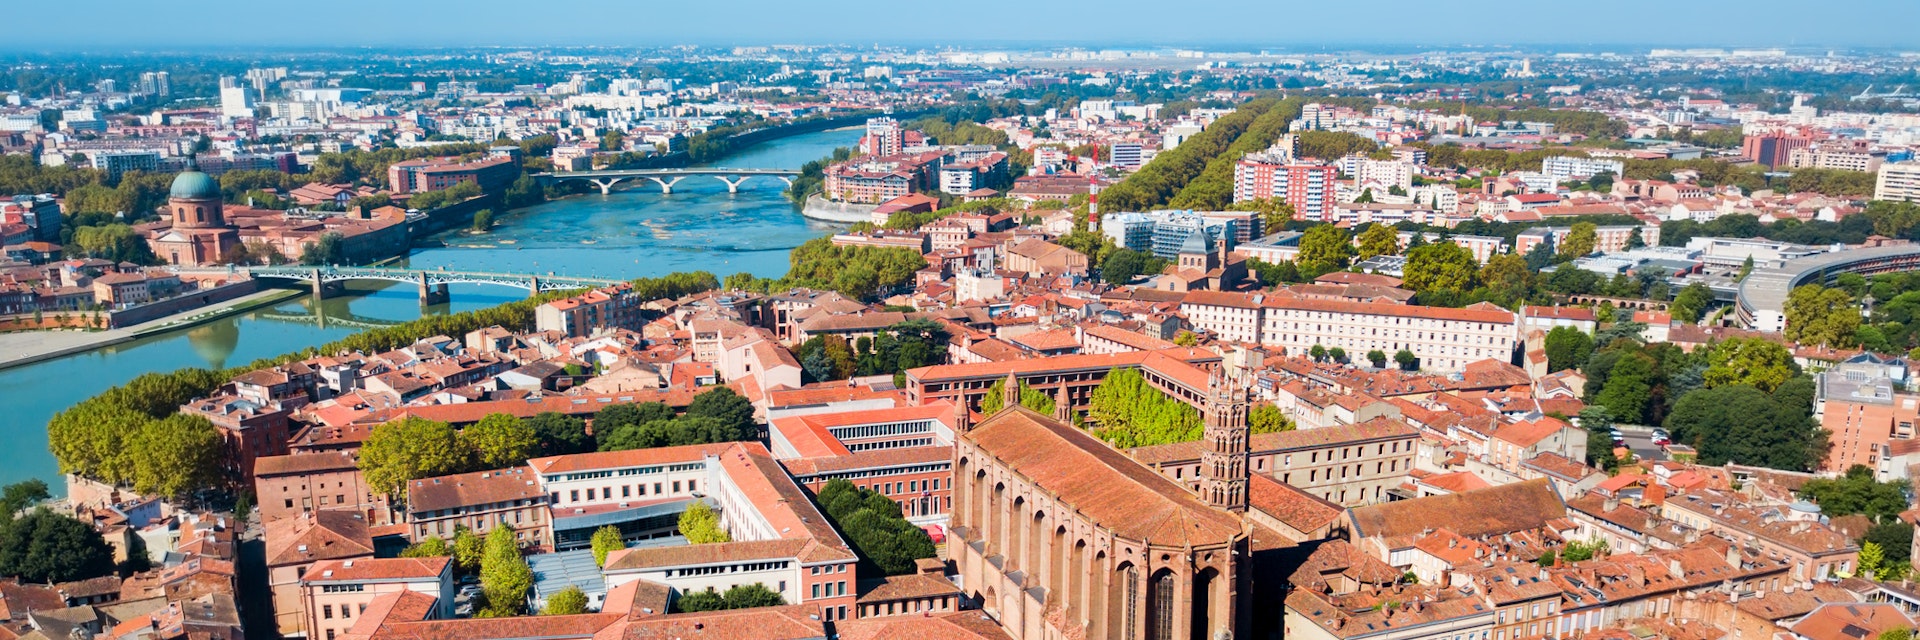 Church of the Jacobins aerial panoramic view, a Roman Catholic church located in Toulouse city, France
1226073534
des, couvent